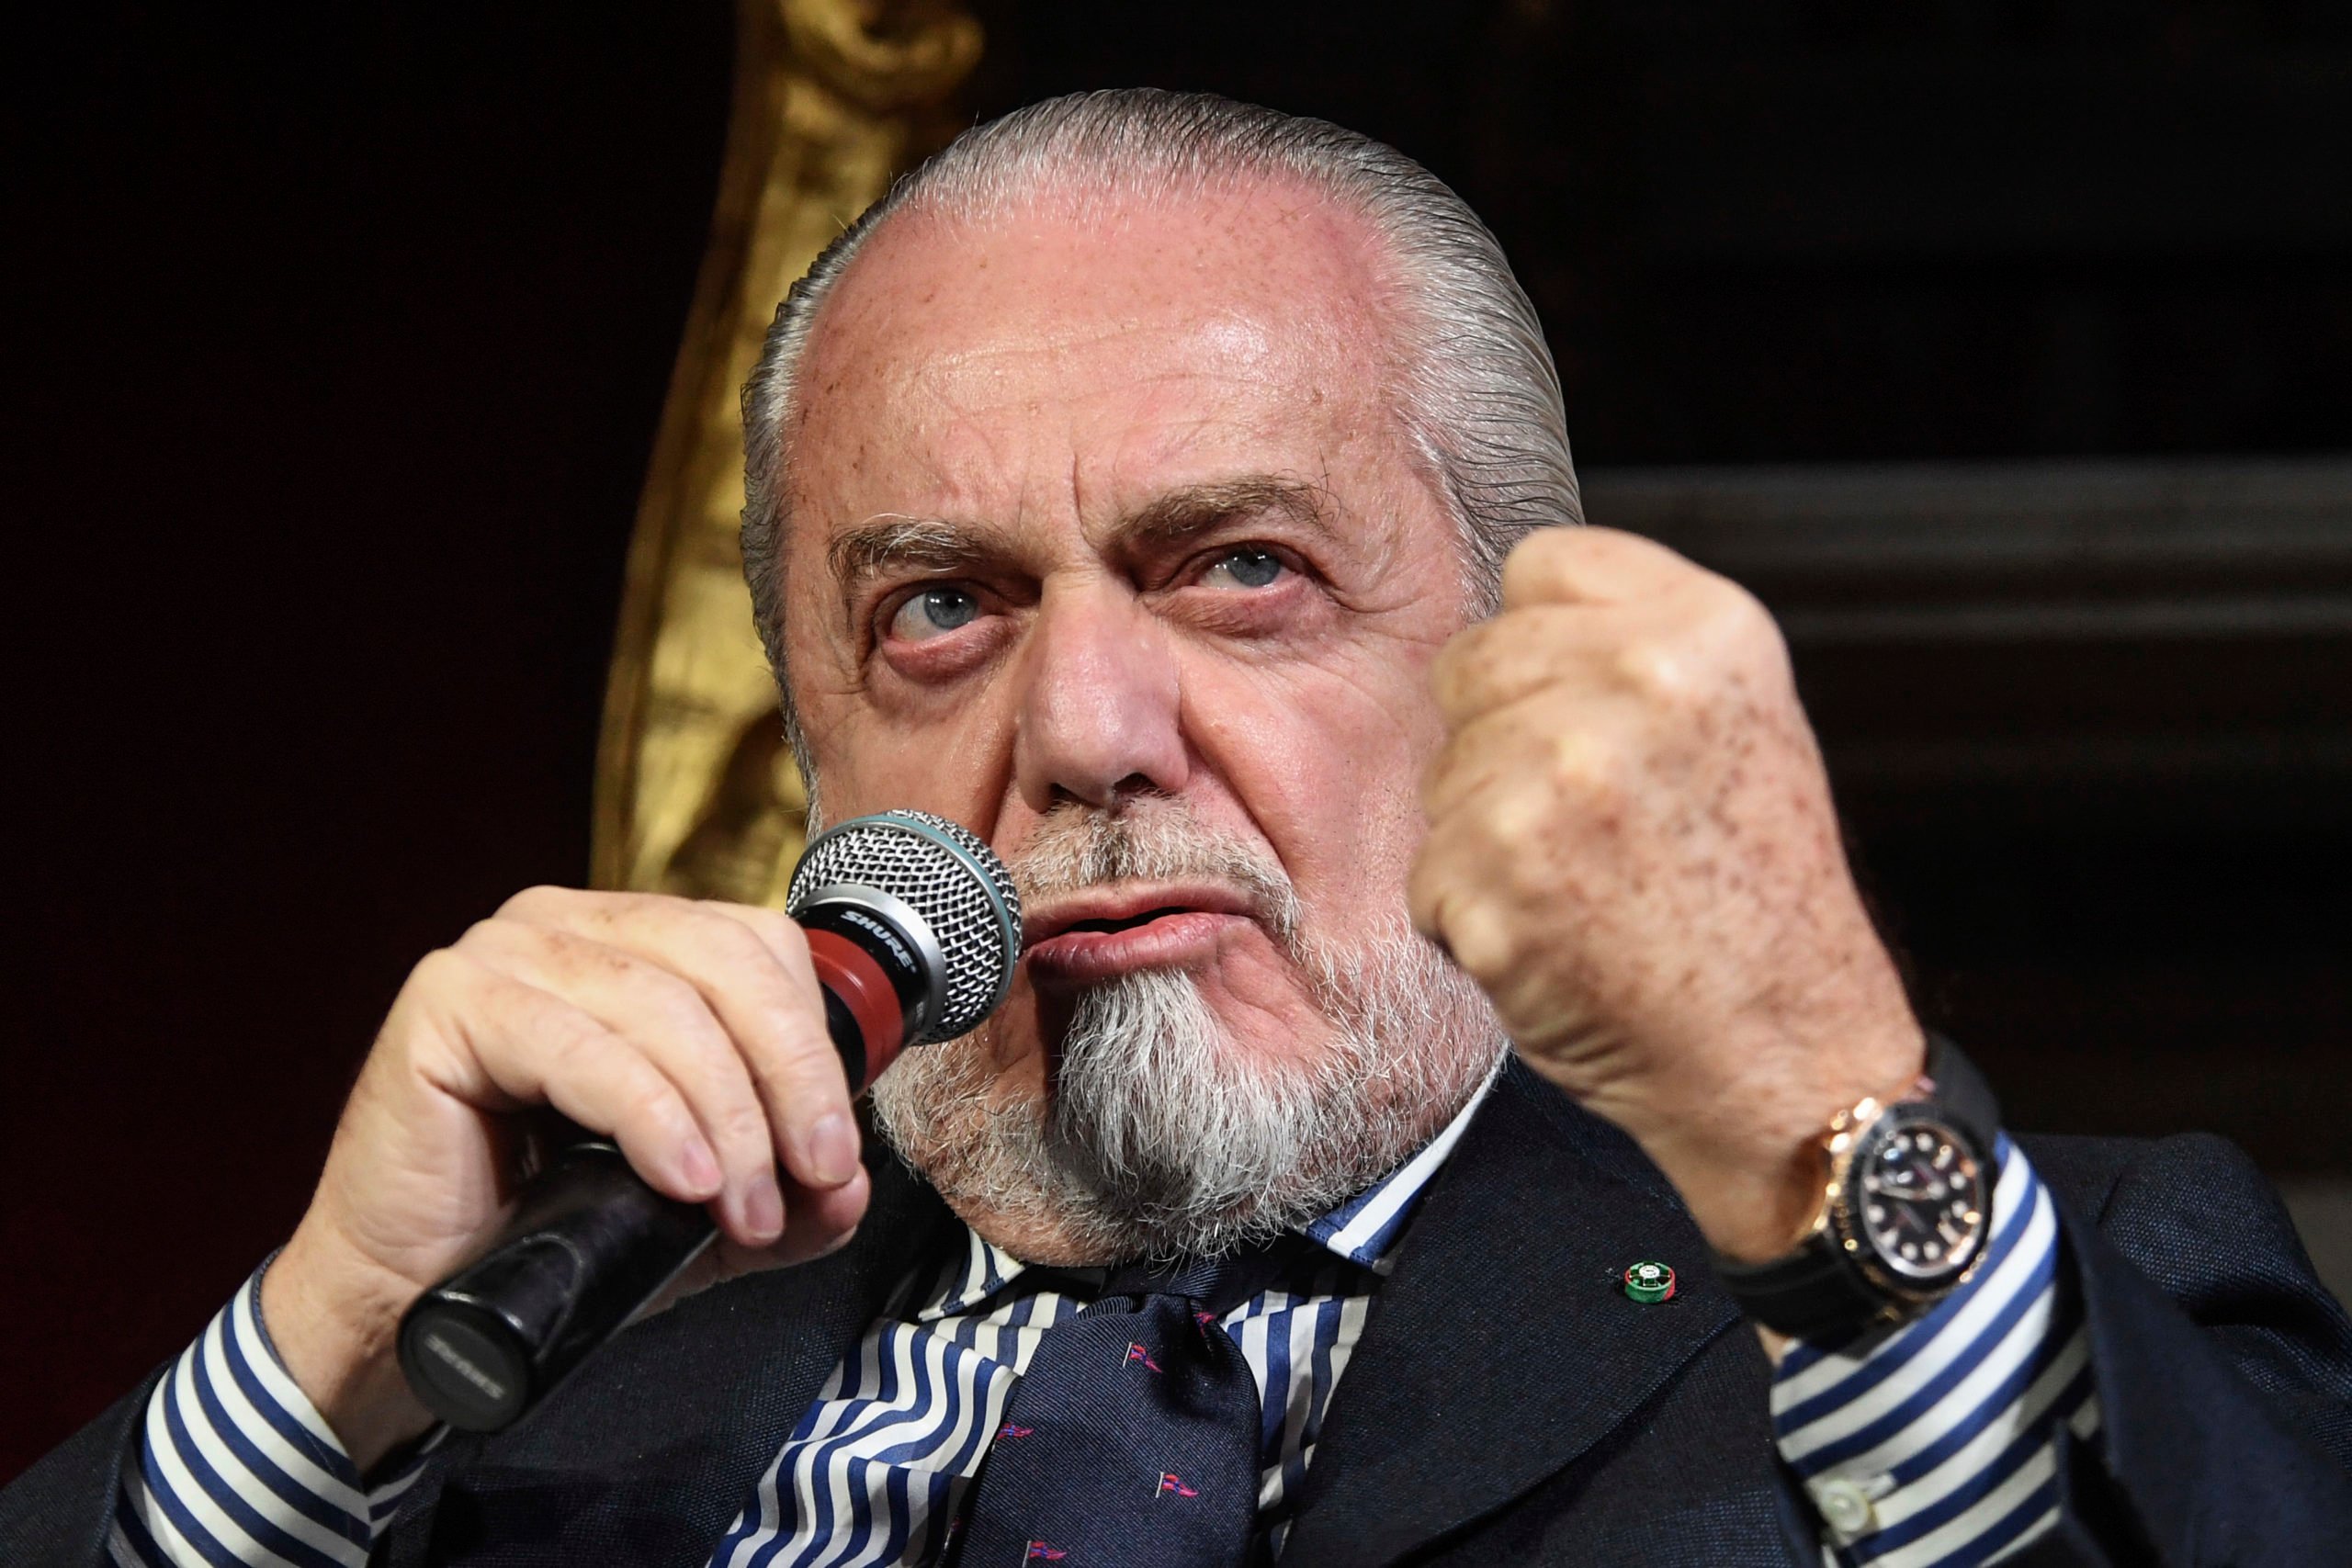 Napoli are on their way to winning the Scudetto, but Aurelio De Laurentiis is displeased with how the football system works in general.